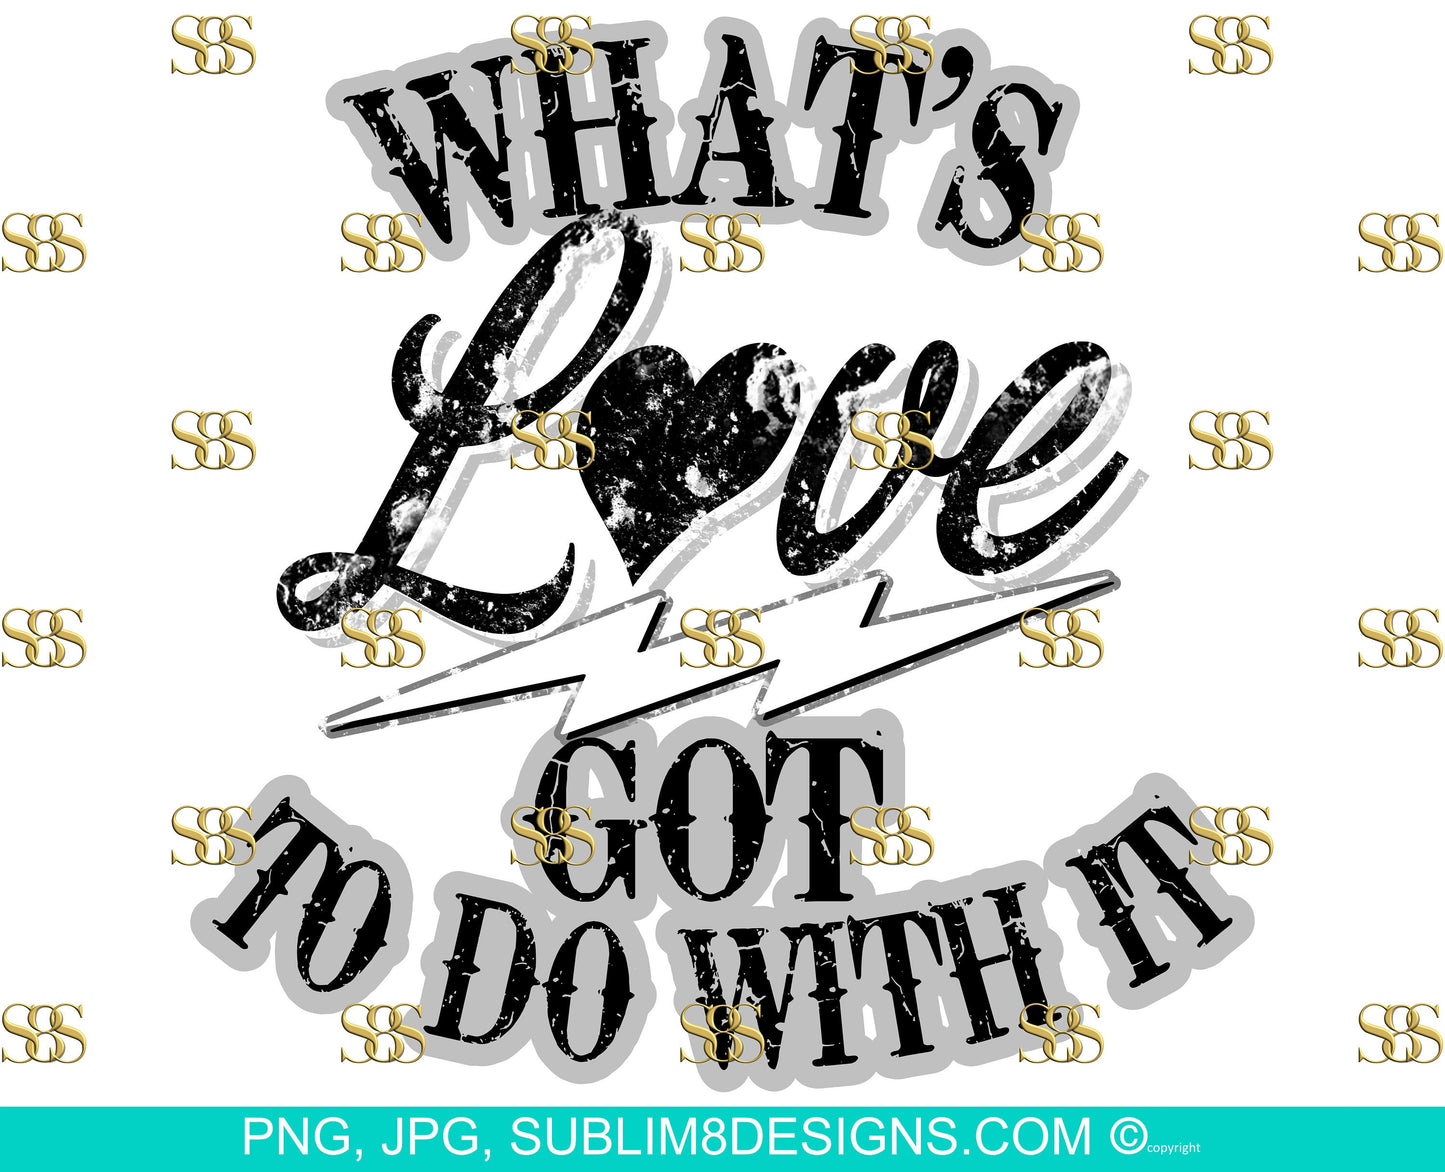 What's Love Got To Do With It | Valentines Day Gift | Valentines Day Card | Love | Heart | Valentine | Sublimation Design PNG and JPEG ONLY